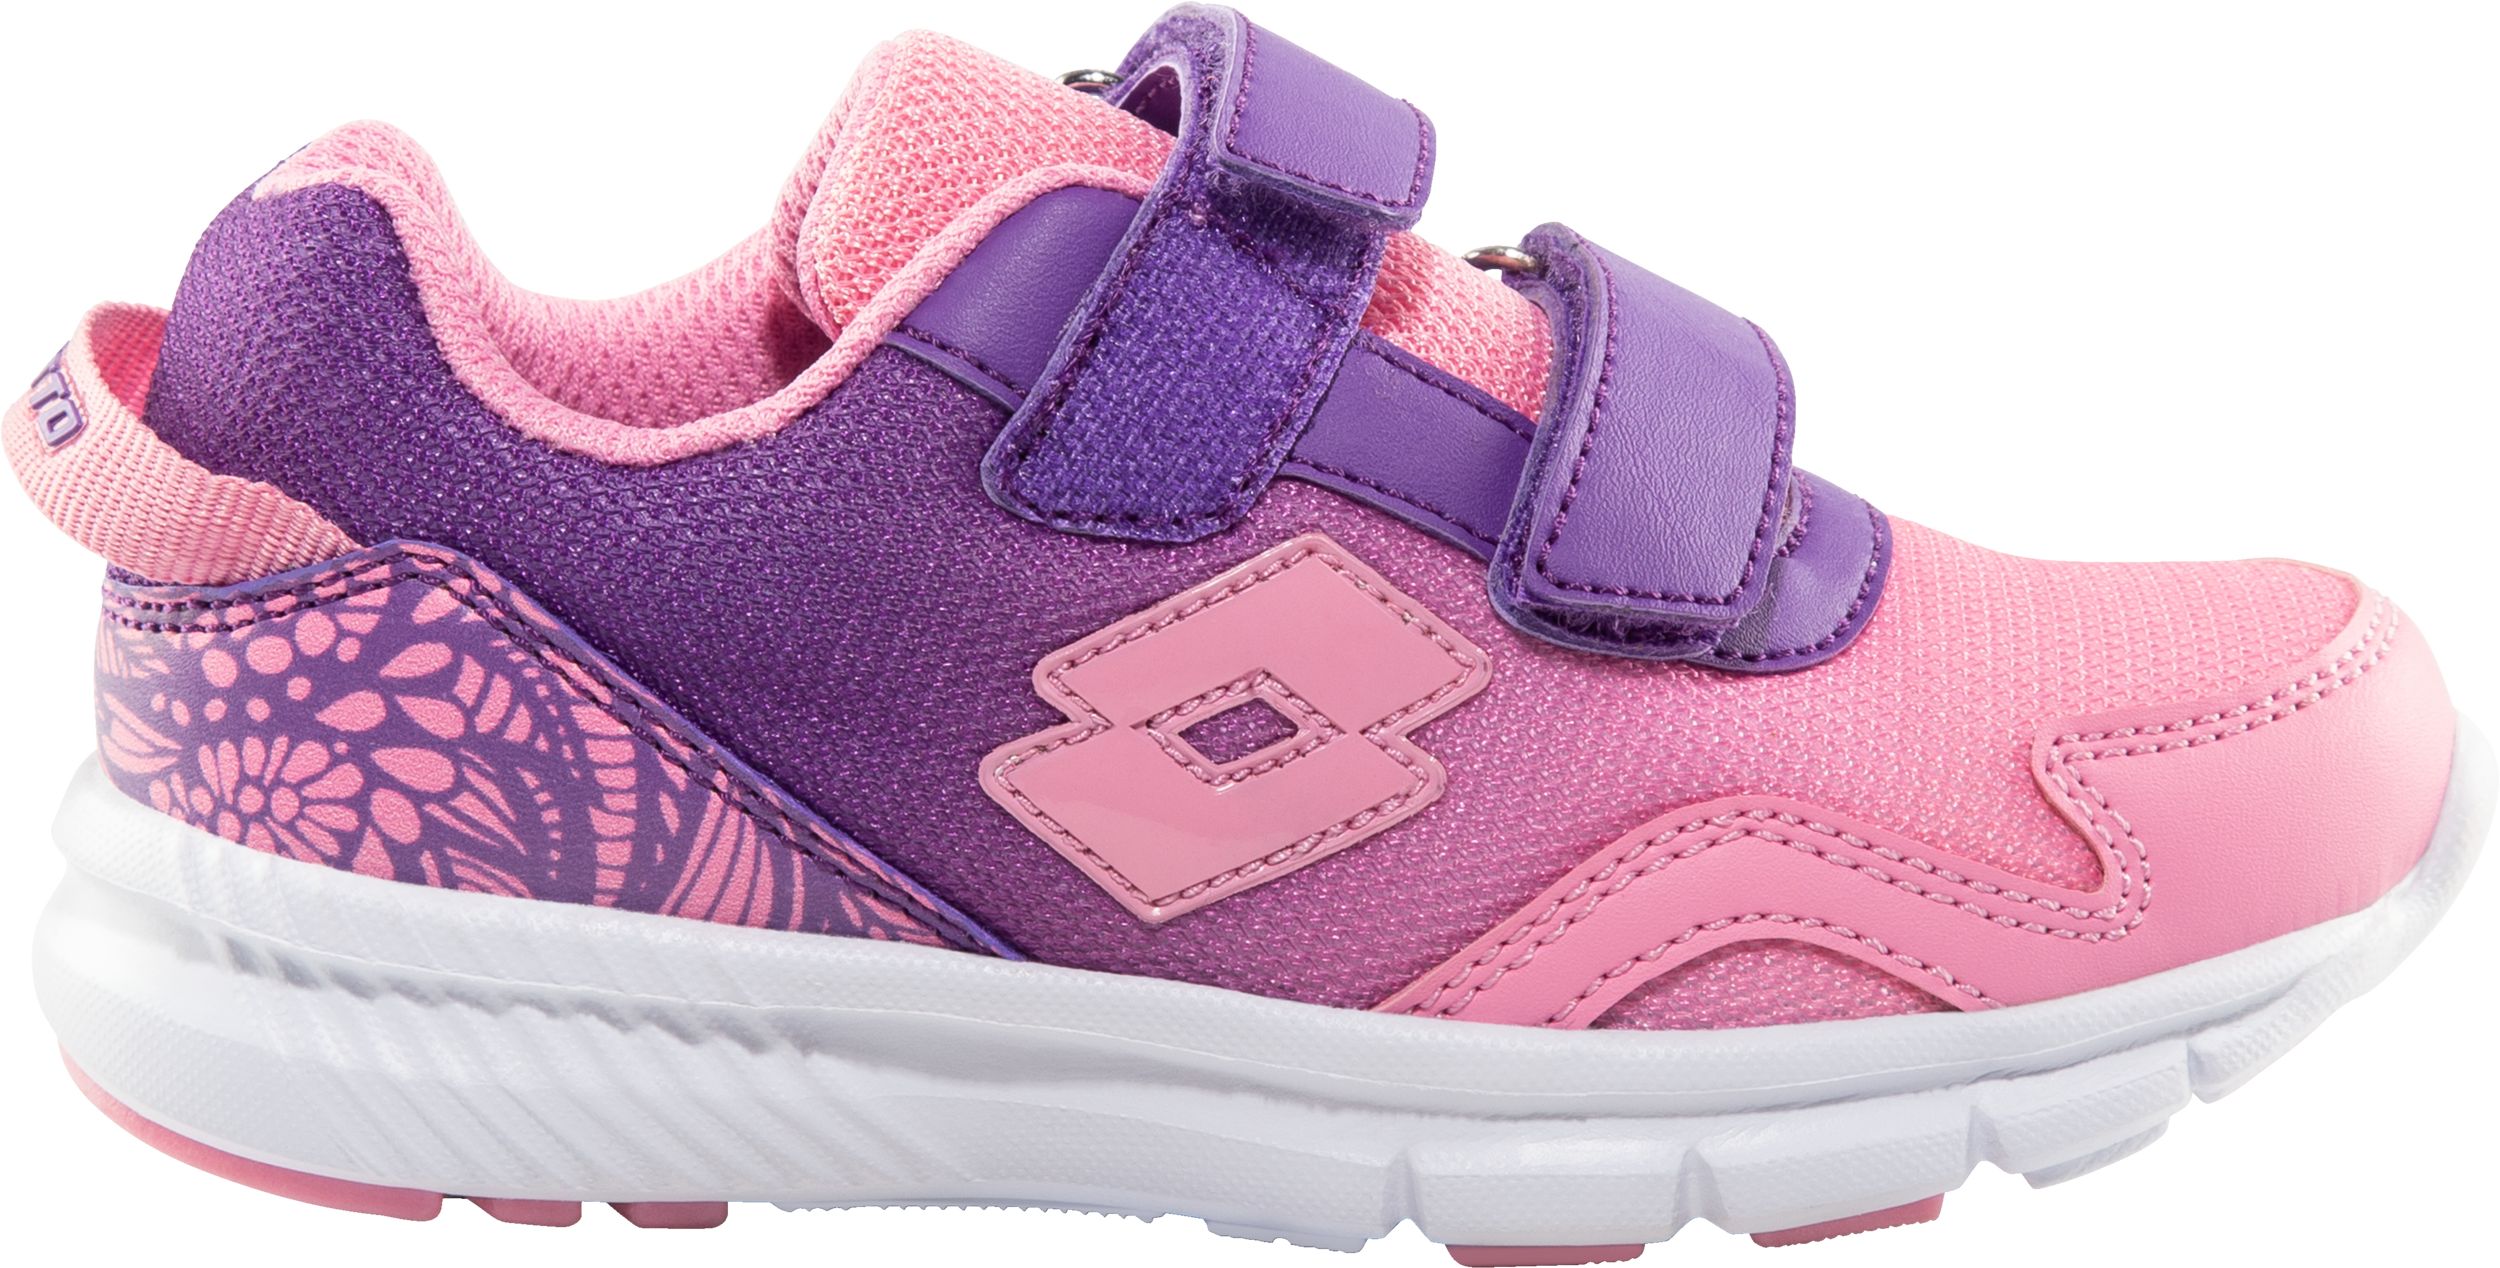 Lotto Toddler Girls' Tansy Running Shoes